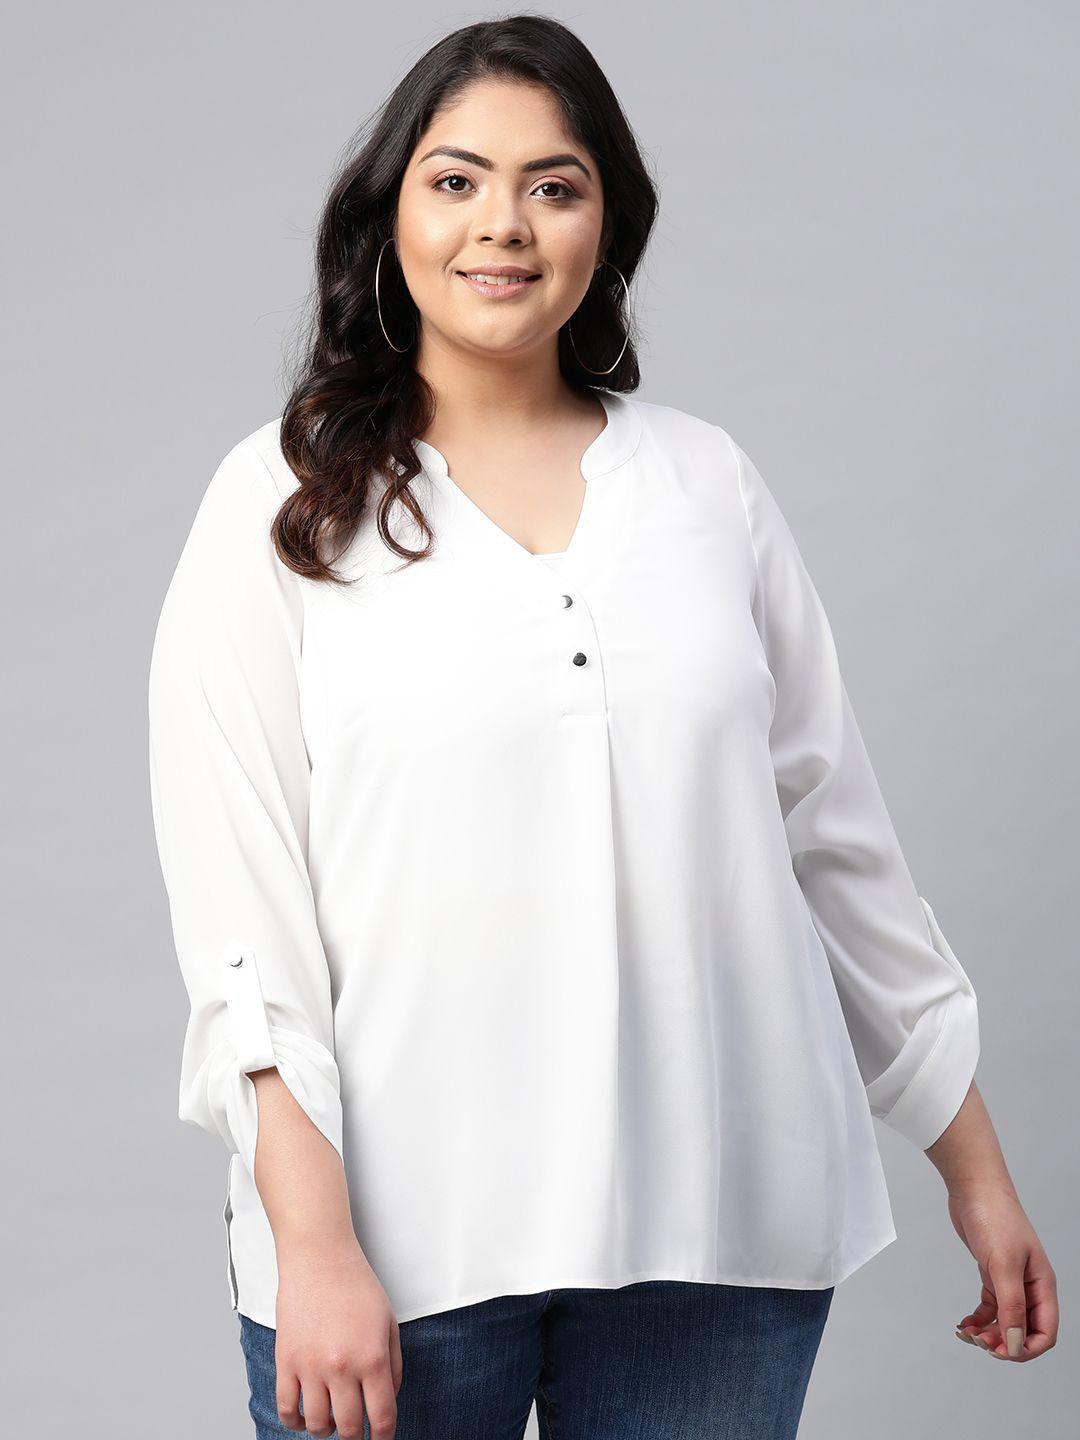 dorothy perkins white curve mandarin collar roll-up sleeves shirt style top